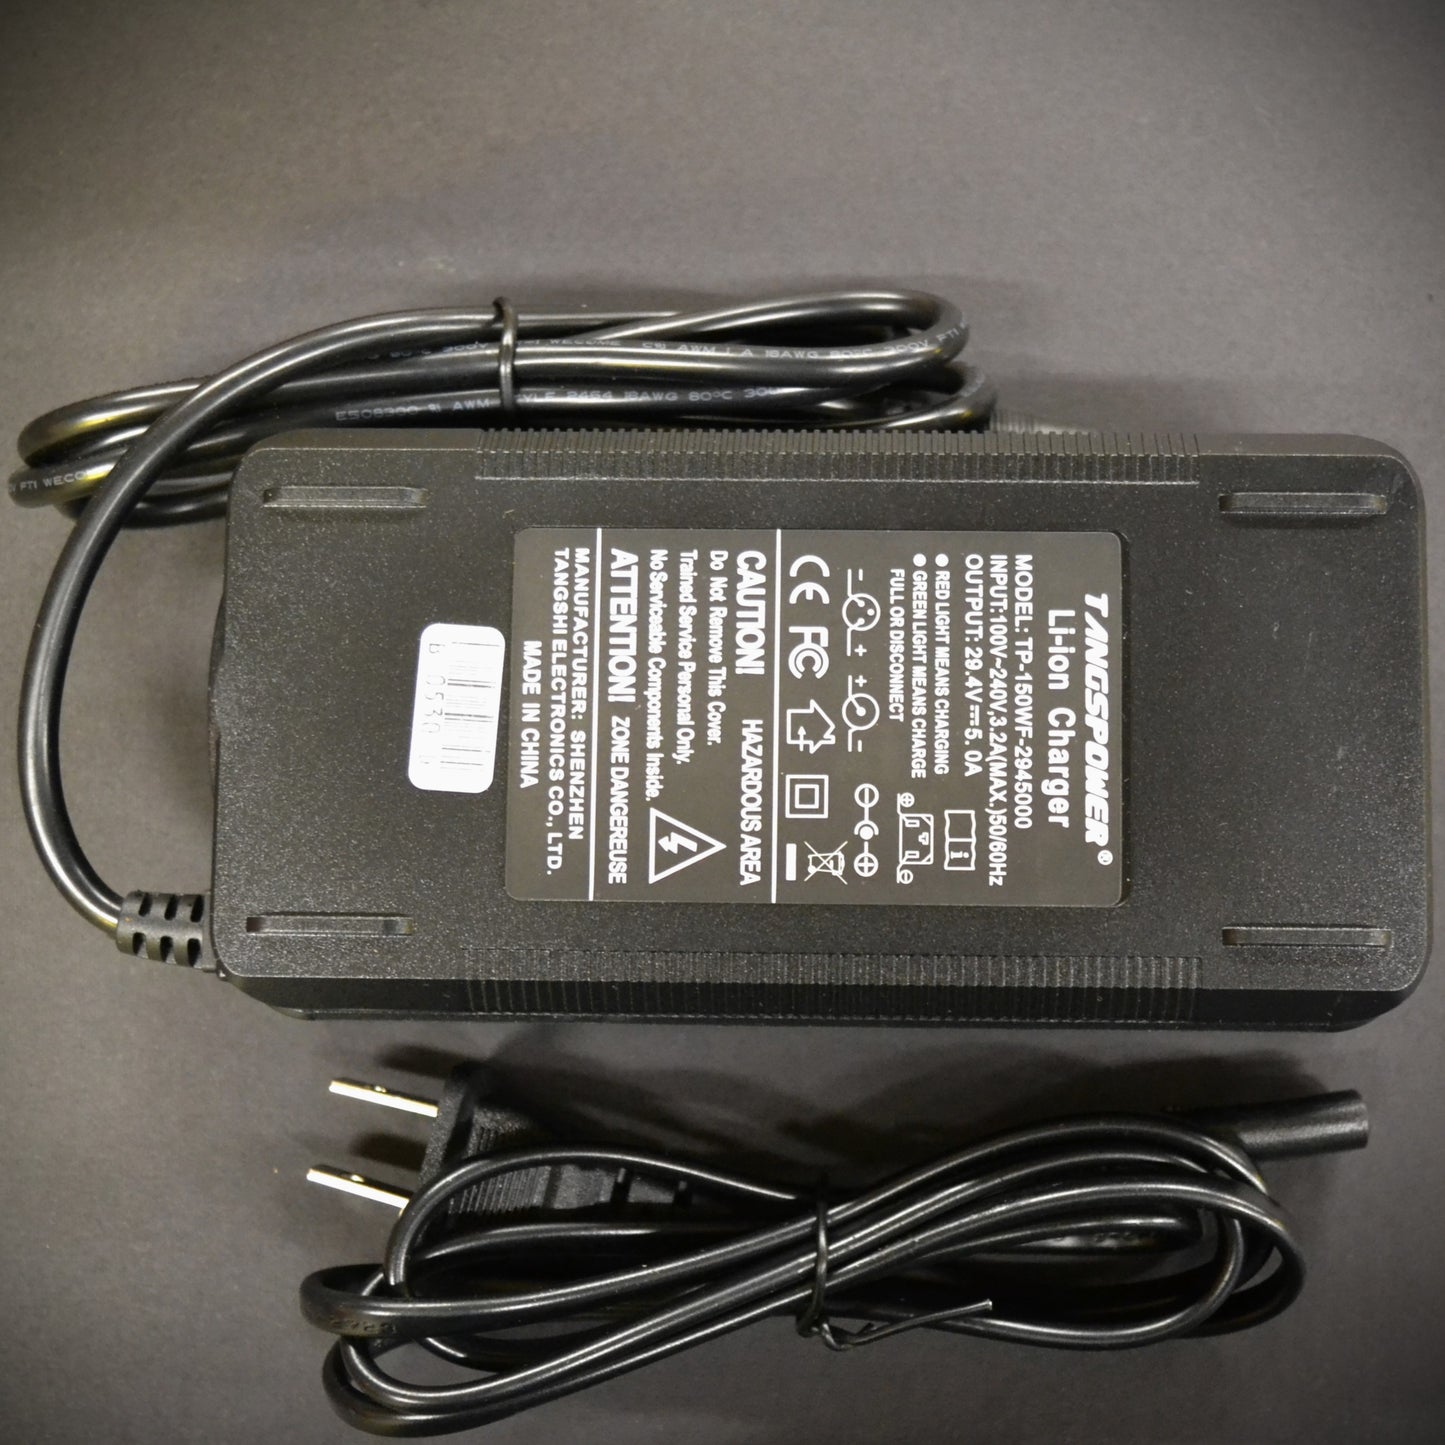 Charger - 24V (7s) 5 Amp - Lithium Ion